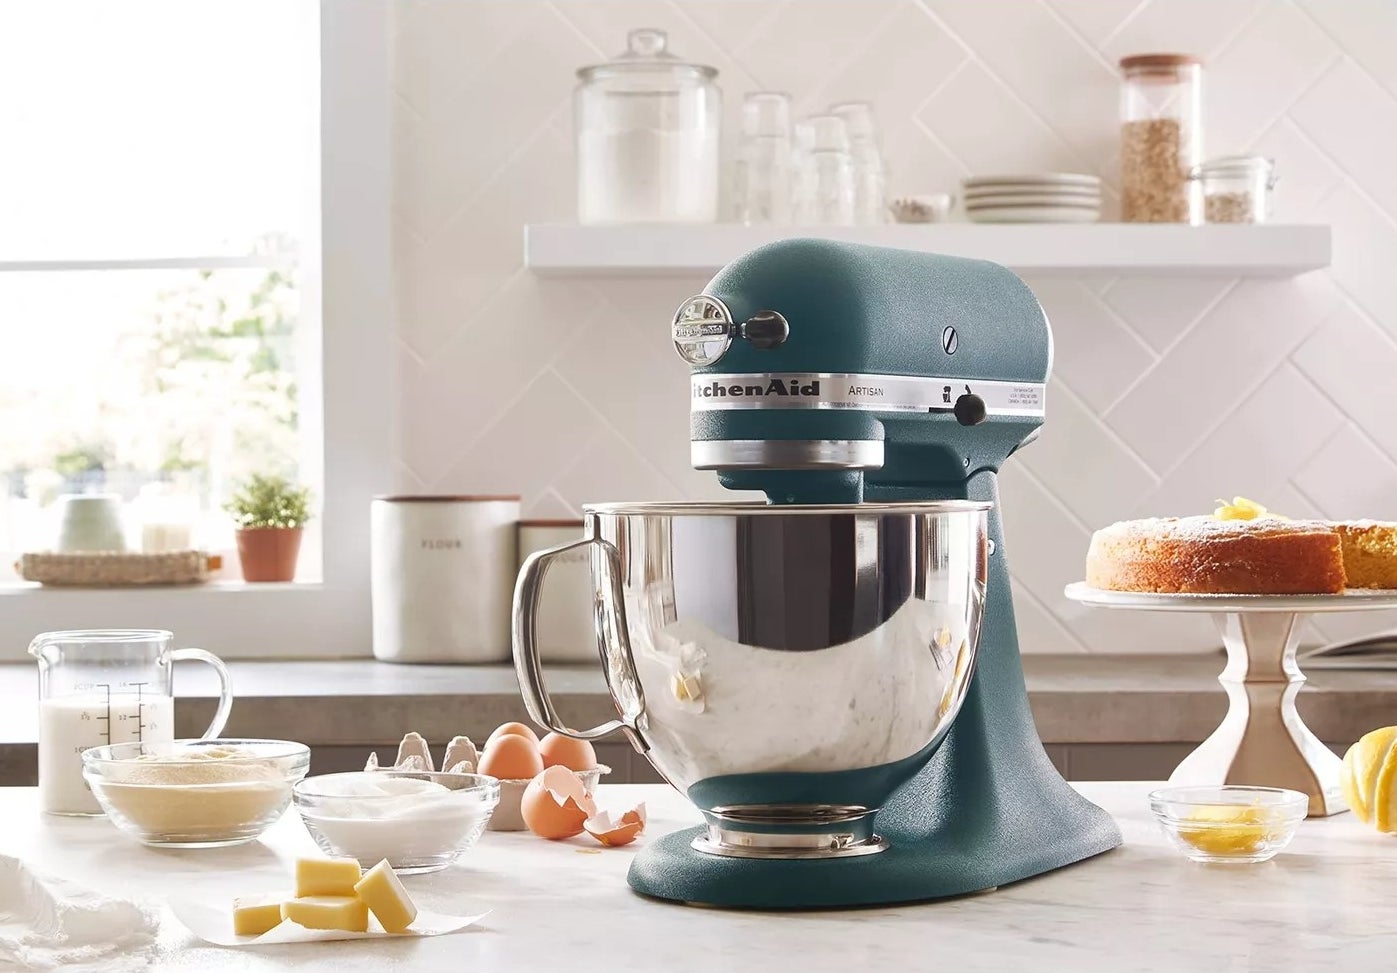 The pebbled hunter green stand mixer on a kitchen counter mixing dough